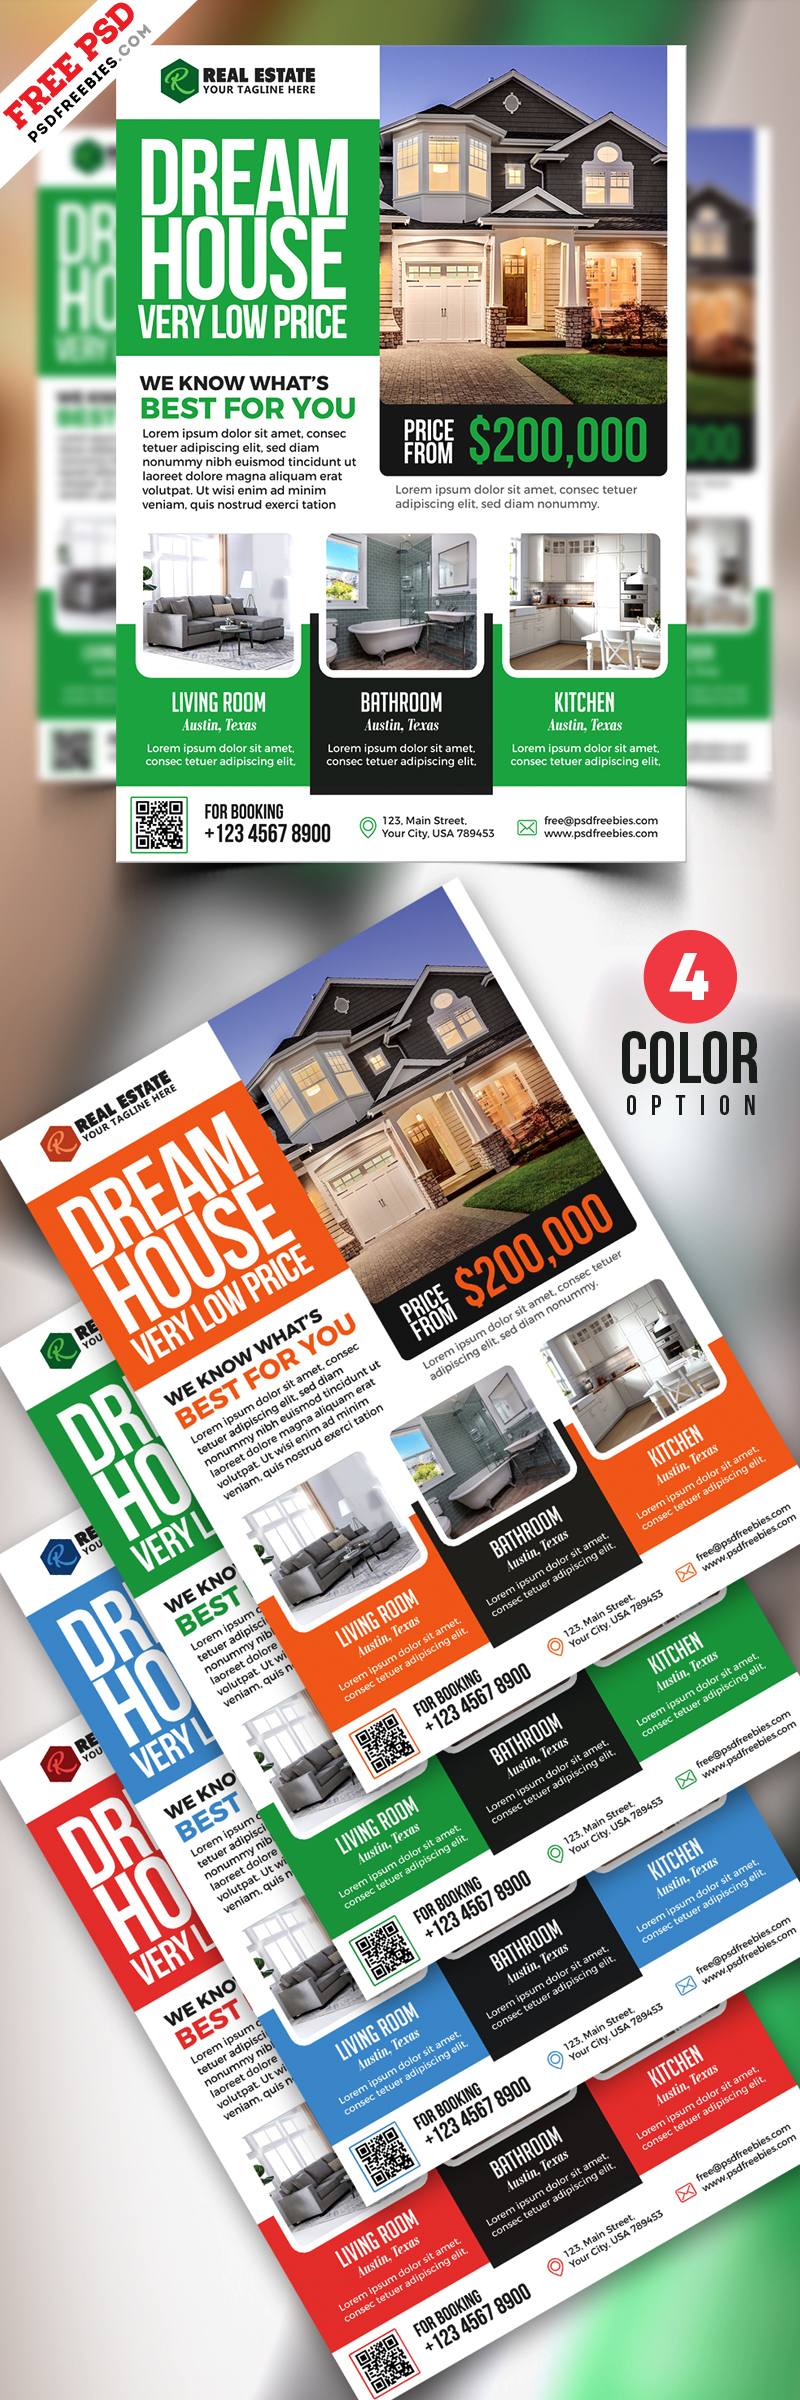 PSD Real Estate Flyer Templates – PSDFreebies.com Pertaining To Real Estate Flyer Template Psd